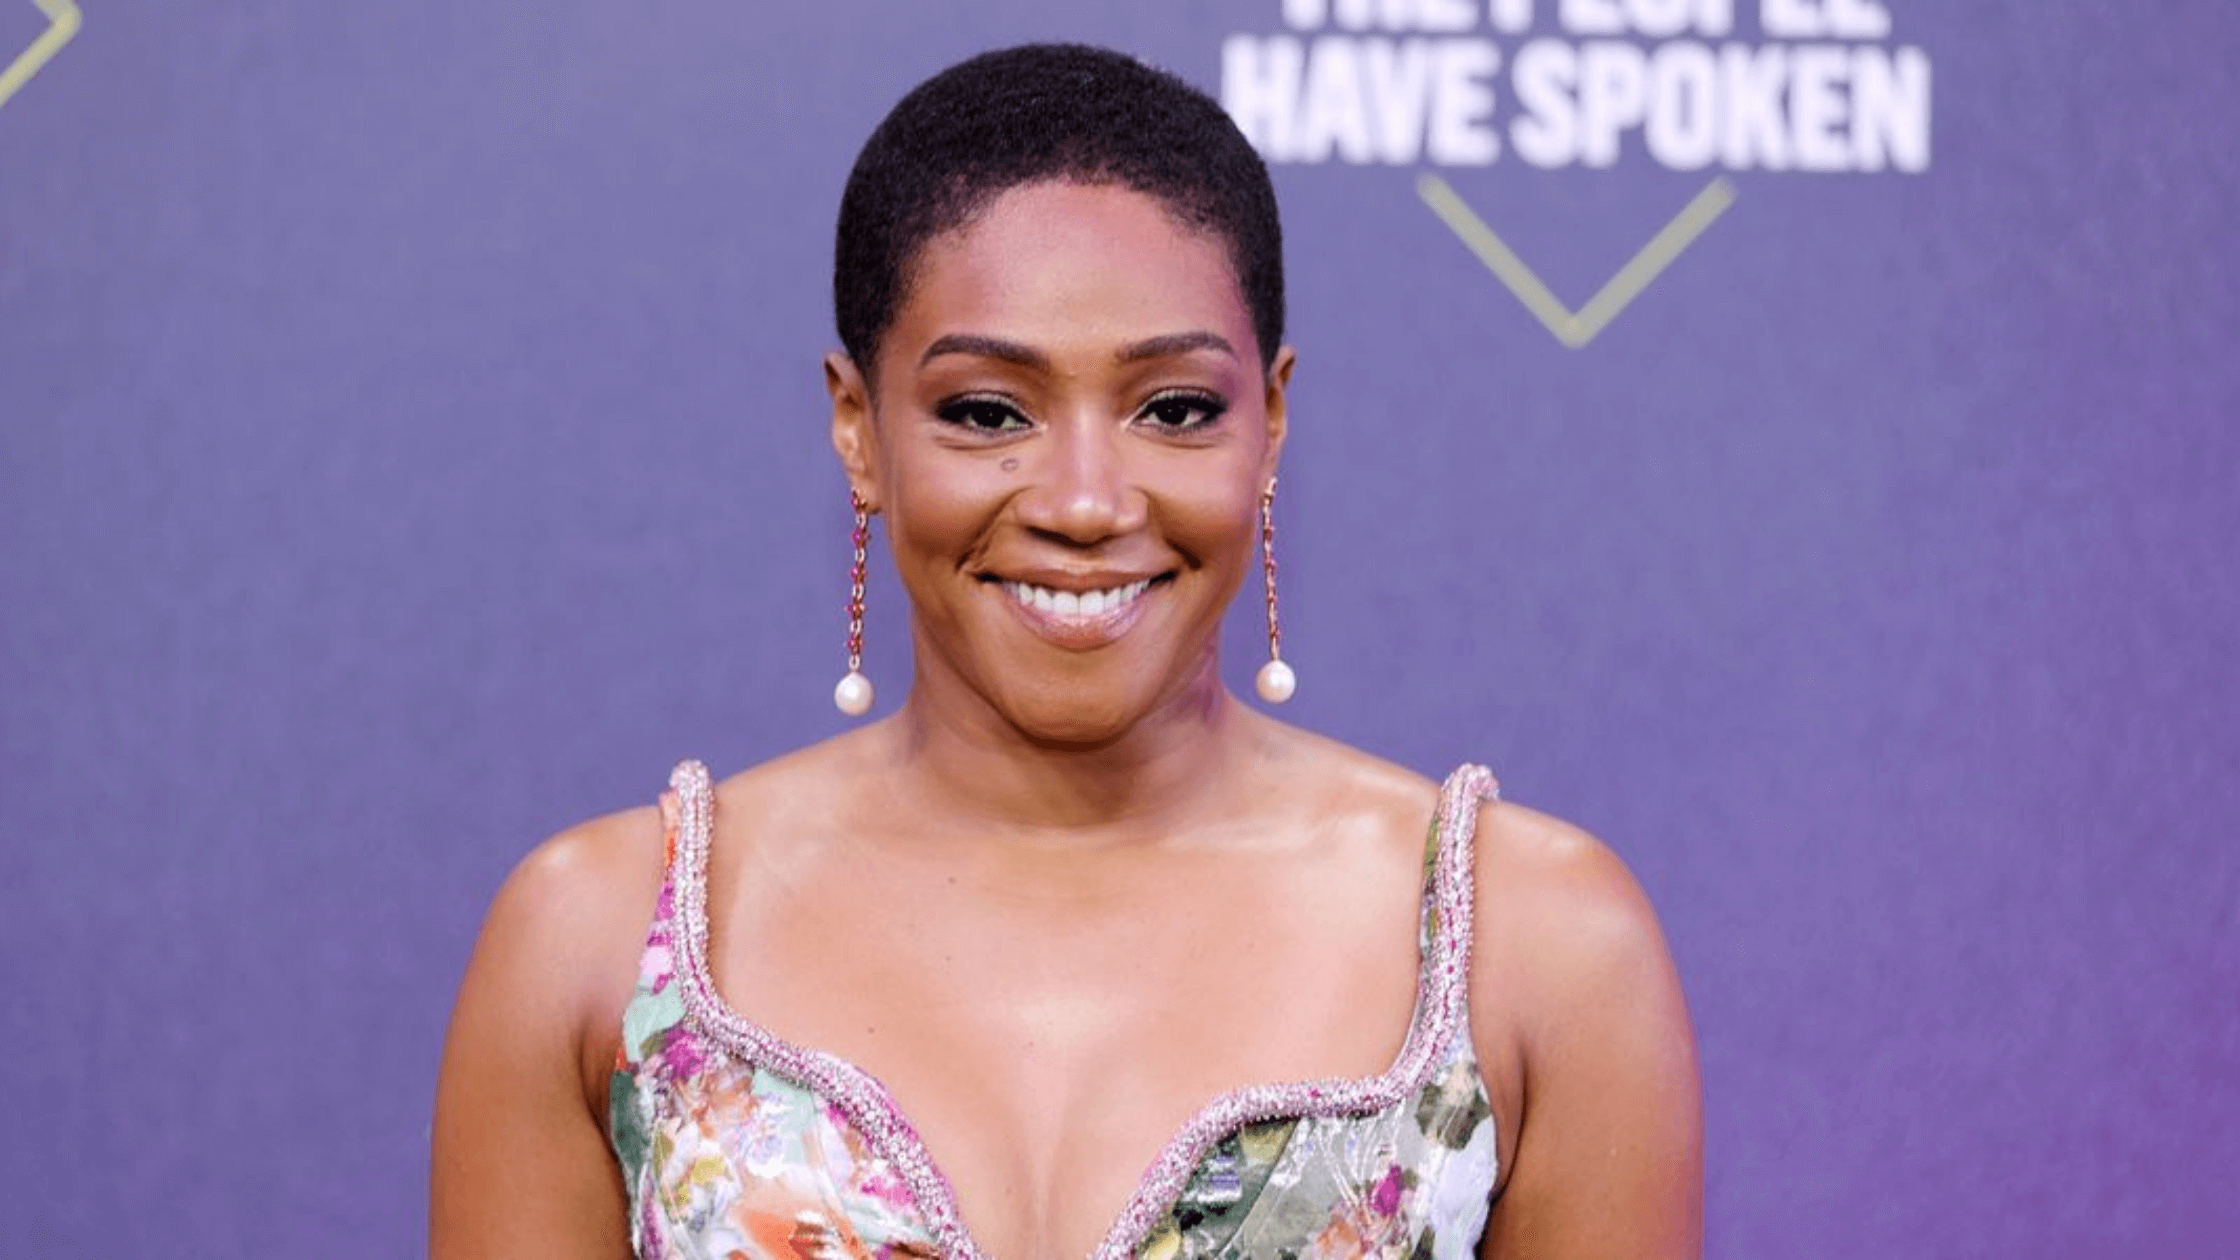 What Made Tiffany Haddish So Popular? Wealth, Age, And Other Personal Details